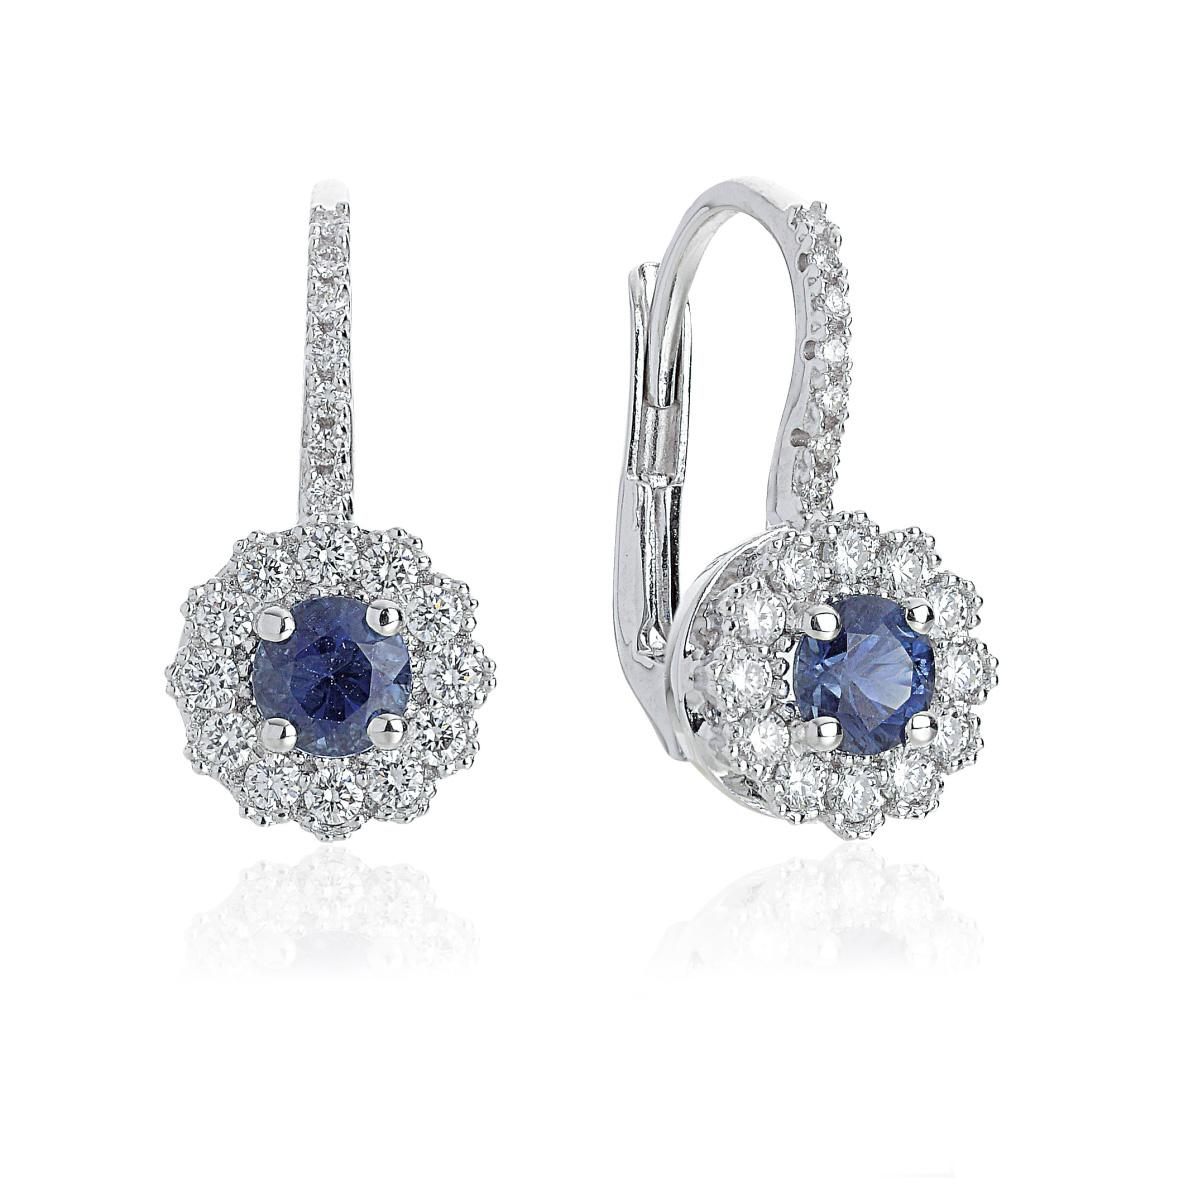 Clip earrings in 18kt white gold with diamonds and precious stones - OD382